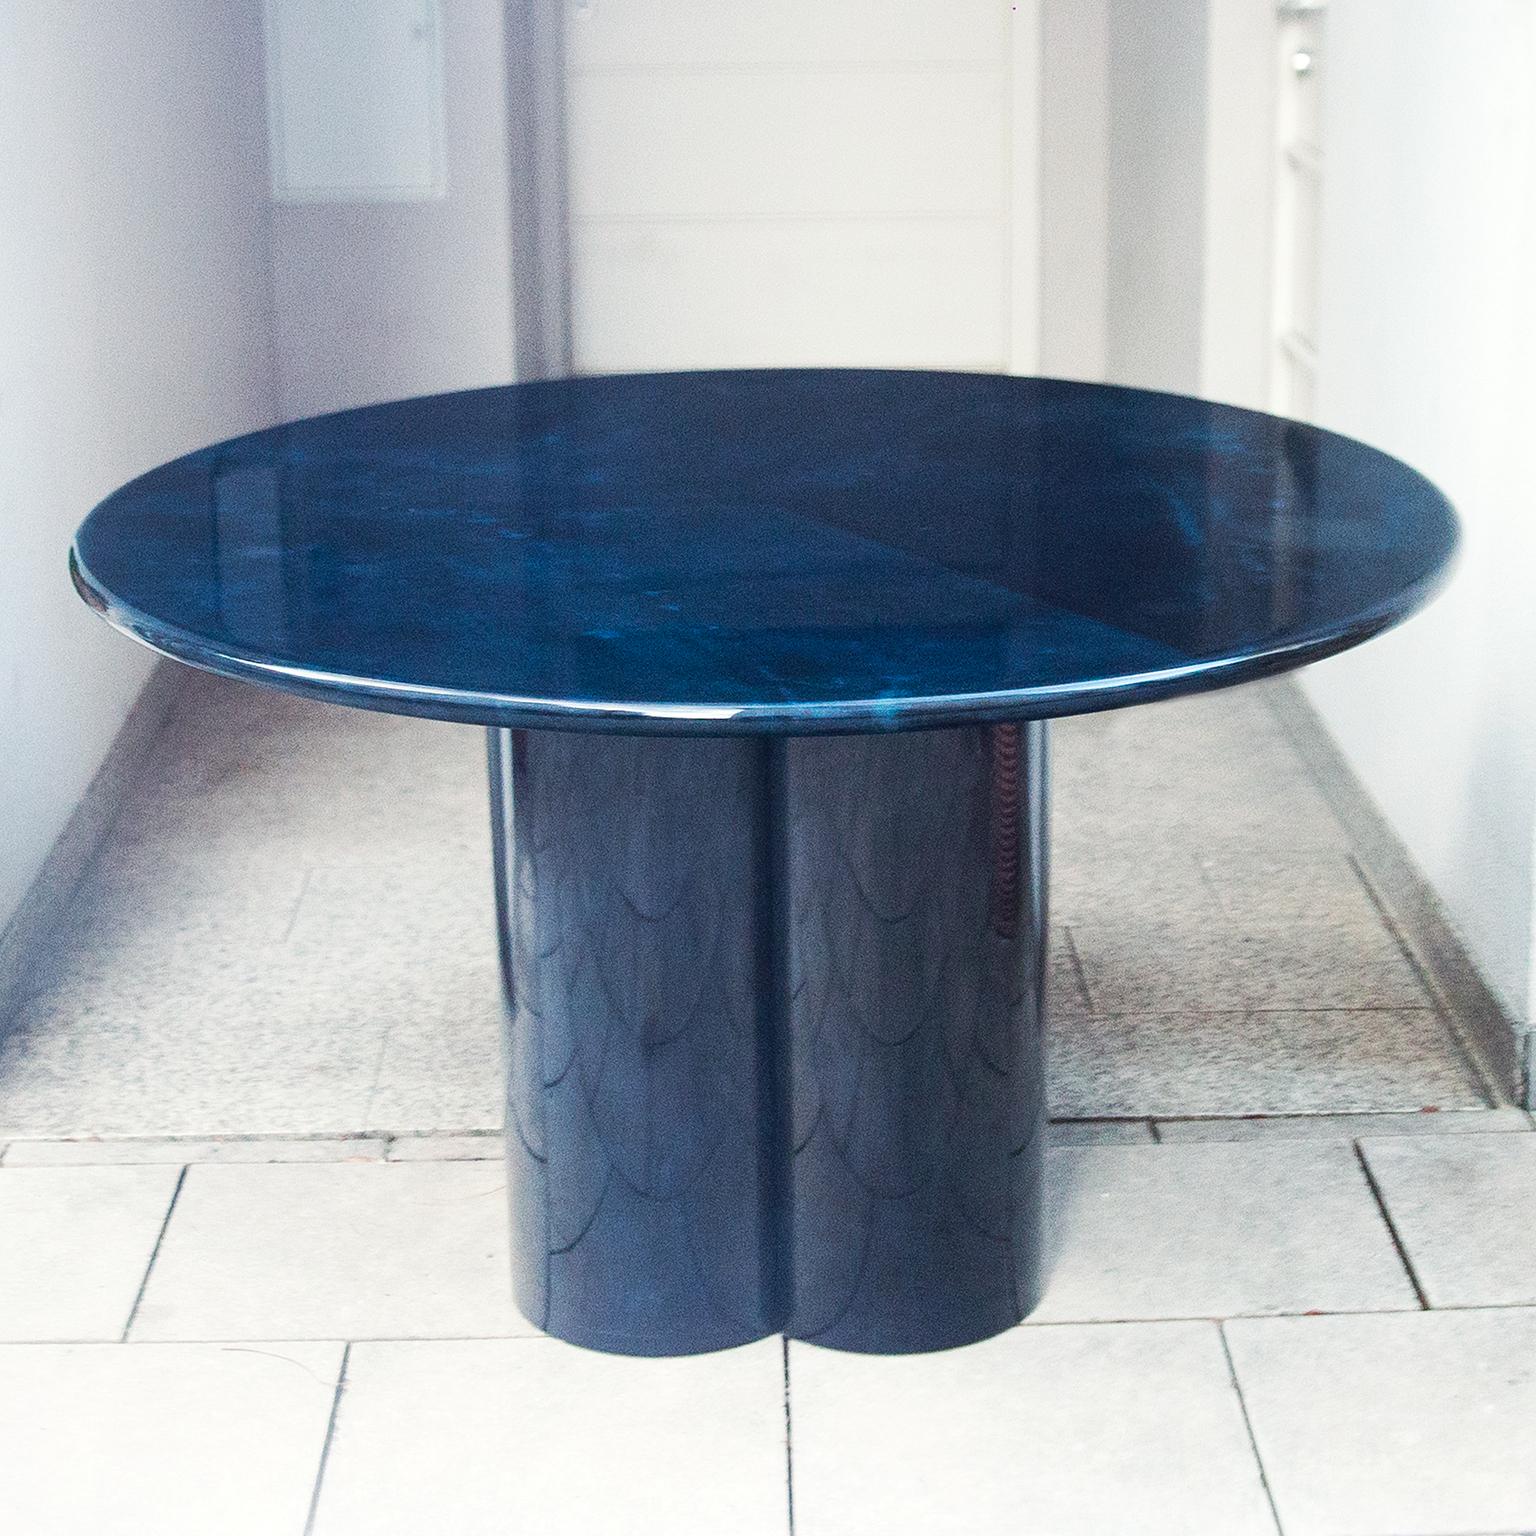 Elegant Aldo Tura parchment round dining table is based on iconic four-column stand.

This particular dining table was executed in the late 1970 and is in excellent condition.

Along with artists like Piero Fornasetti and Carlo Bugatti, Aldo